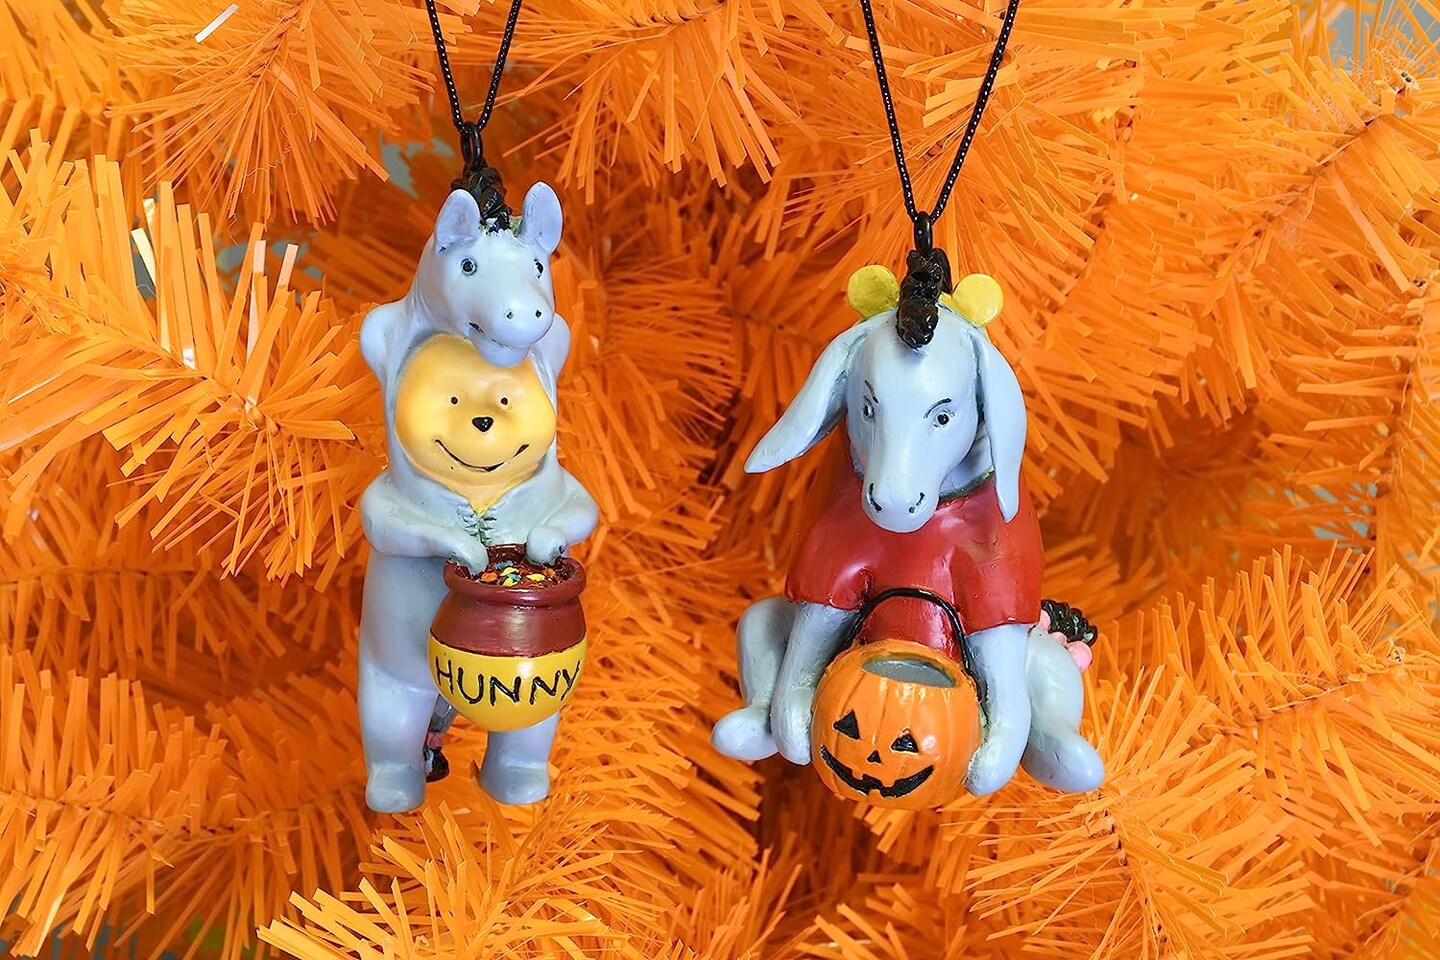 Tree Buddees Winnie The Pooh and Eeyore Dressed up as Each Other for Trick or Treating Cute Halloween Ornaments